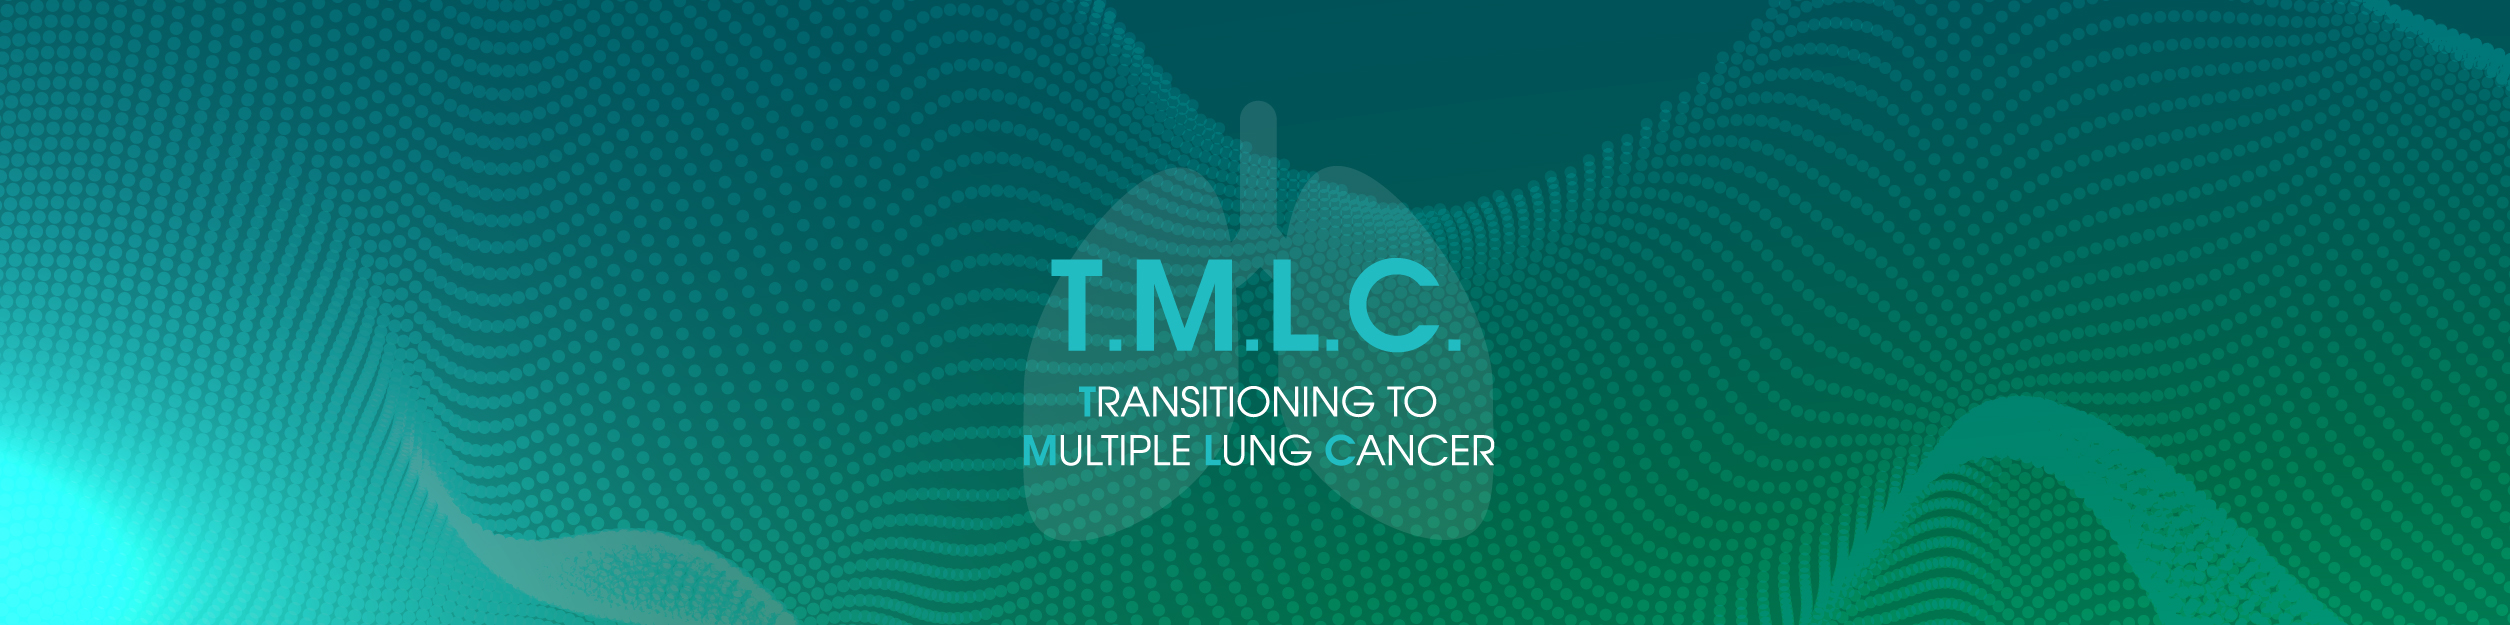 T.M.L.C.___TRANSITIONING_TO_MULTIPLE_LUNG_CANCER___Dr._Bengala